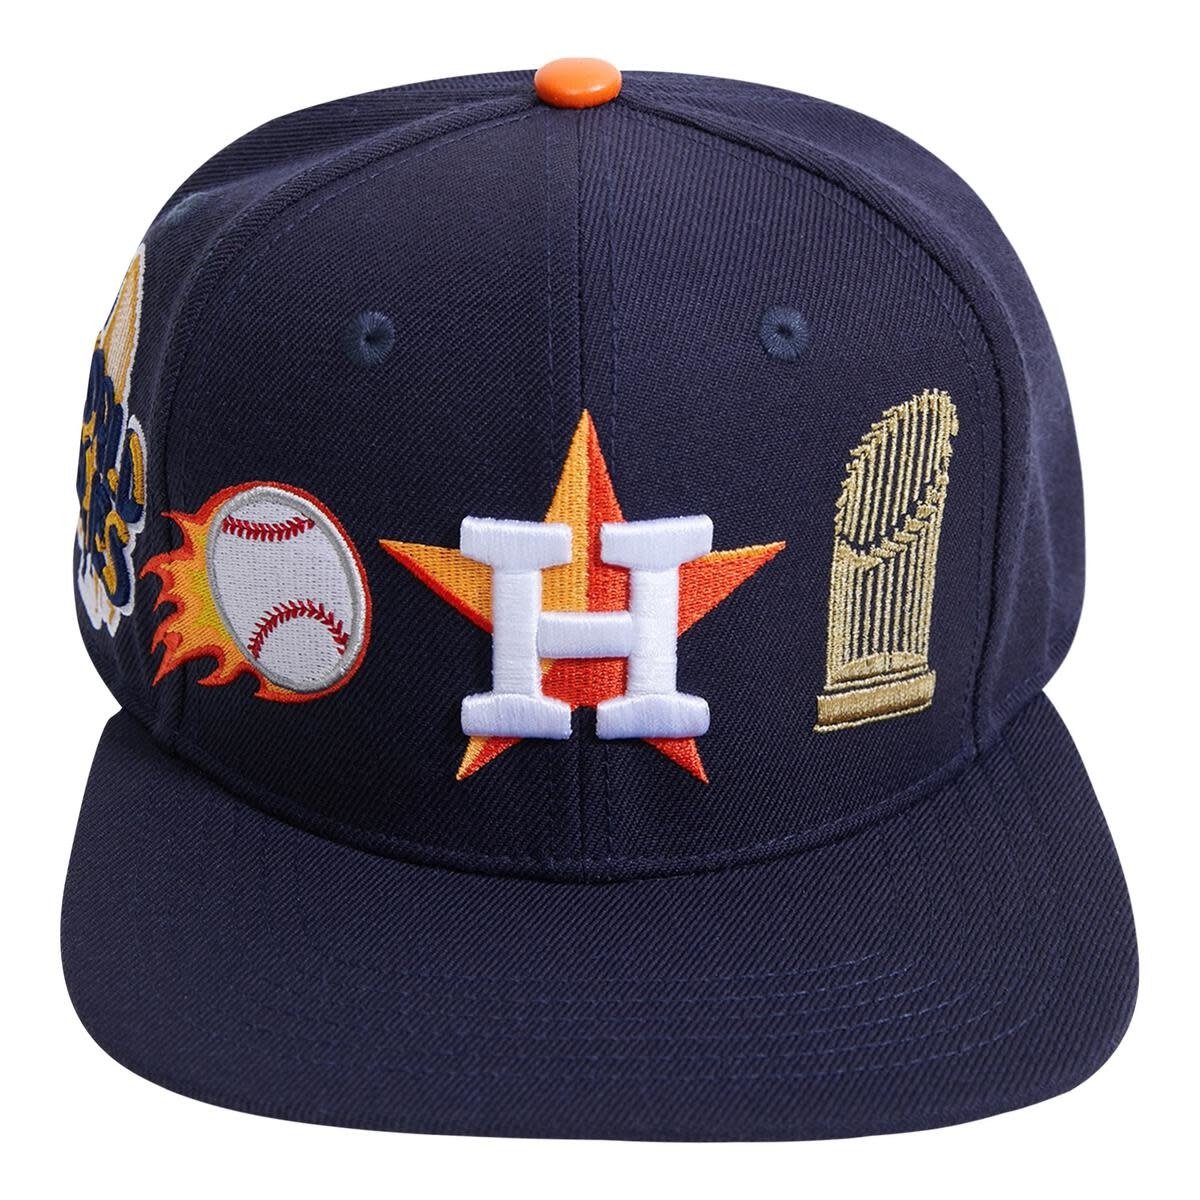 astros shirts and hats